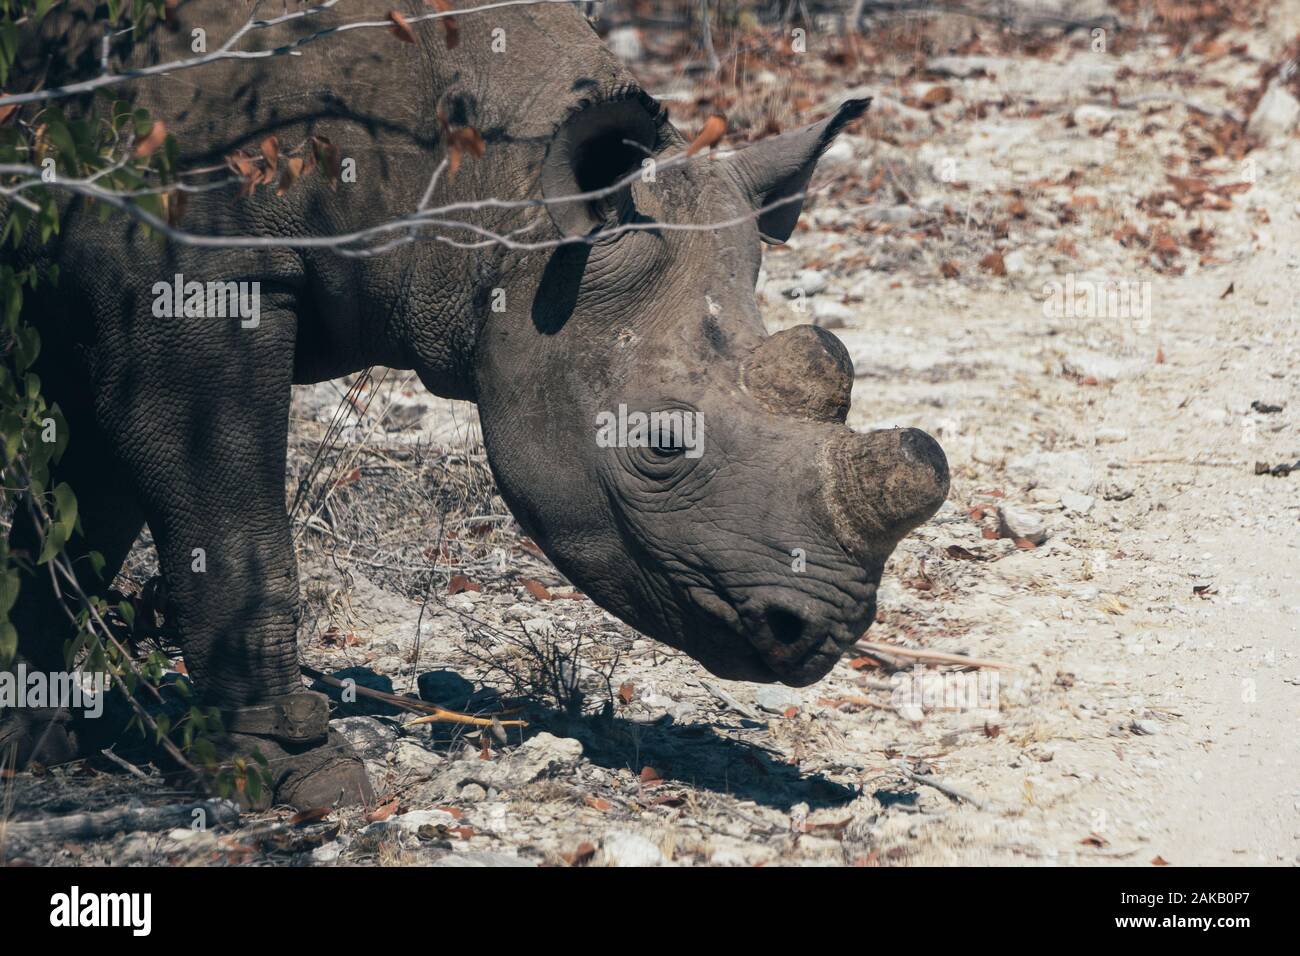 Dehorned Black Rhino or Hook-Lipped Rhinoceros in Etosha National Park, Namibia, the Horn was cut off as a Measure Against Poaching Stock Photo